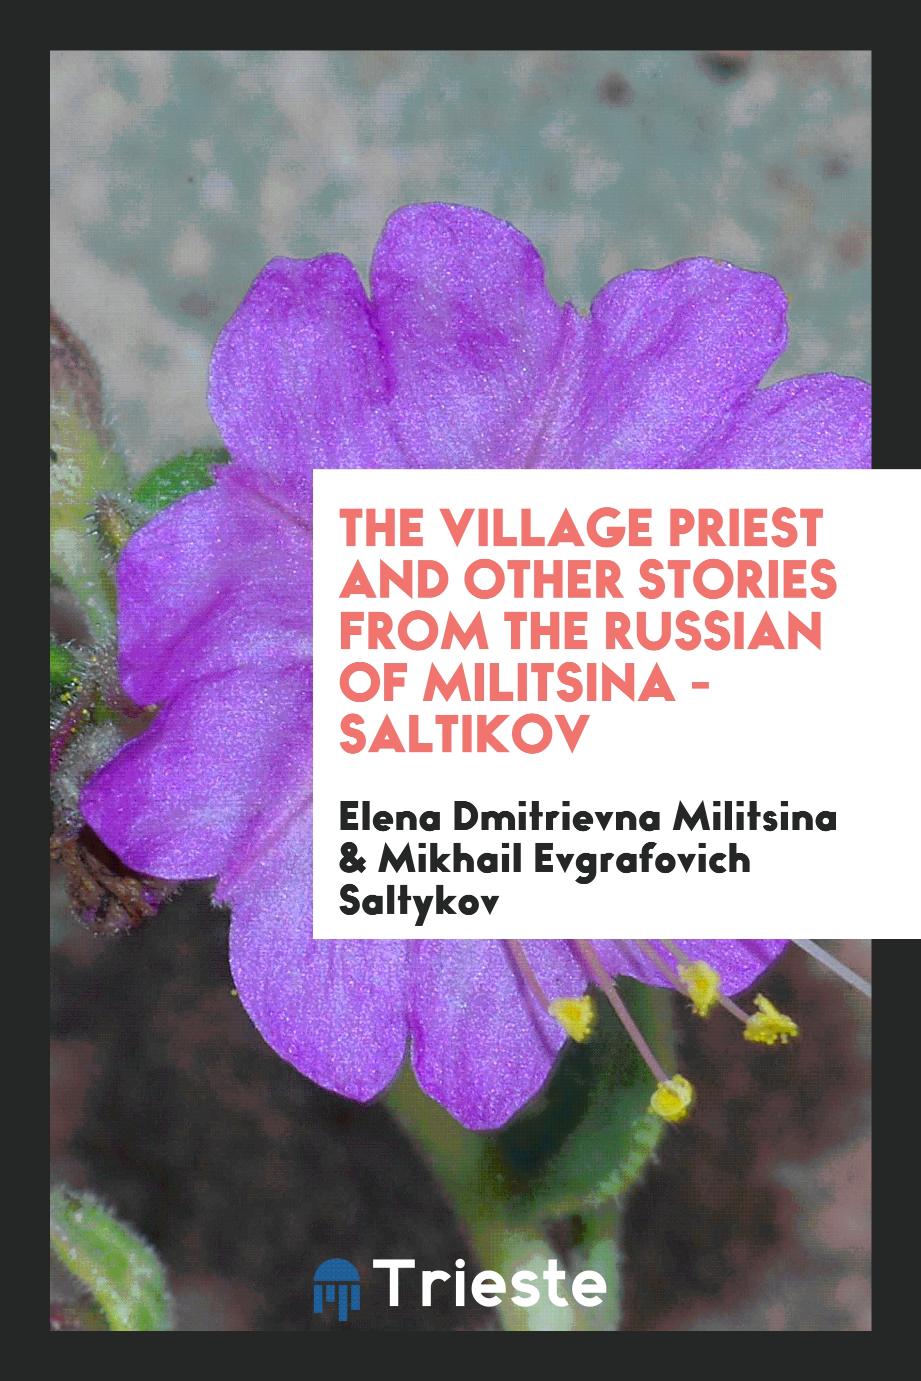 The village priest and other stories from the Russian of Militsina - Saltikov